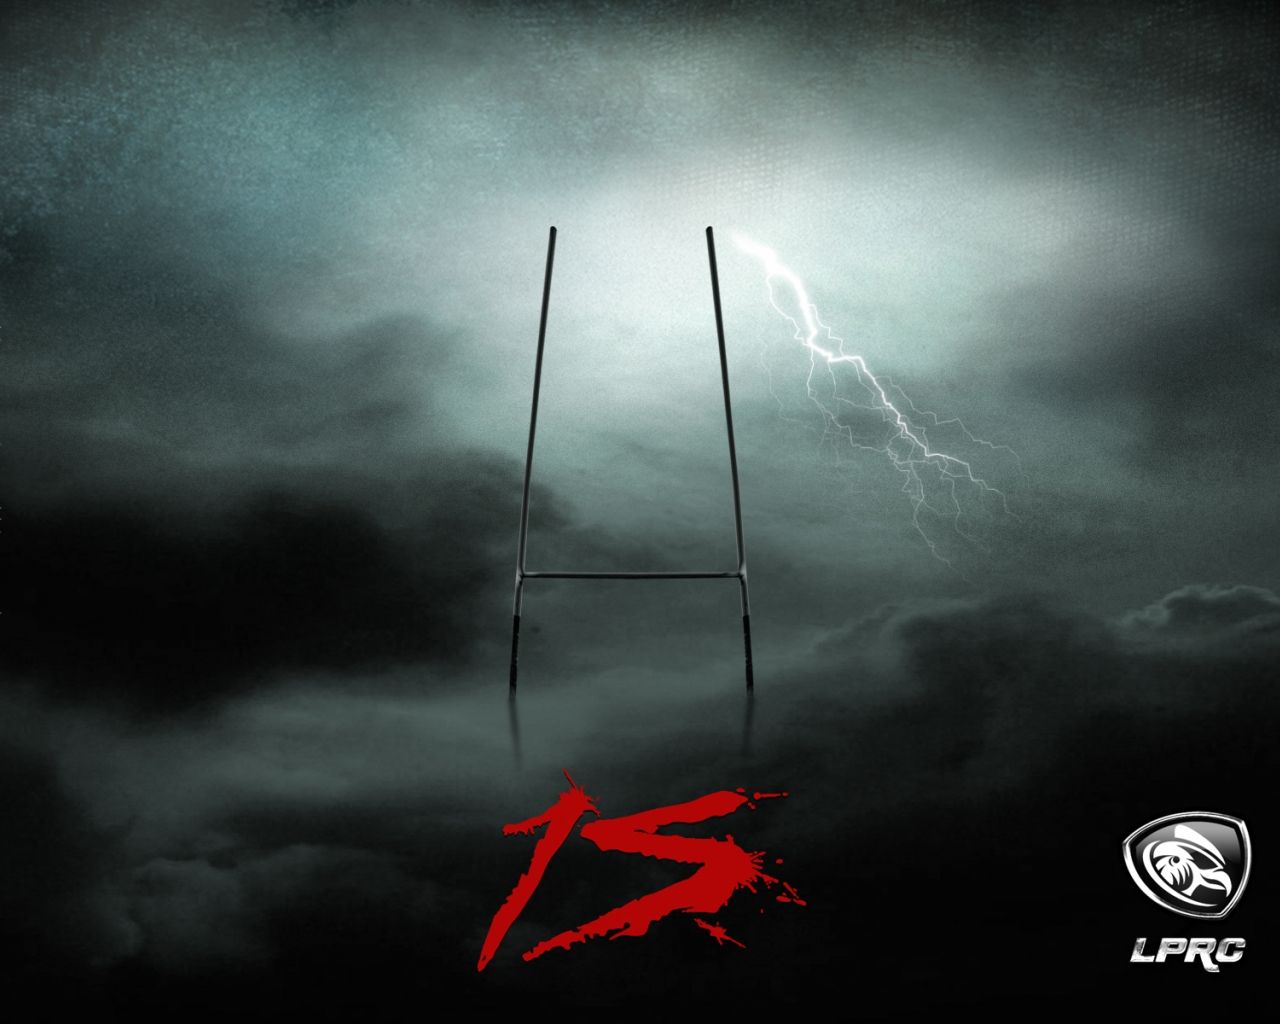 Free download rugby wallpaper 2 rugby wallpaper 3 rugby wallpaper